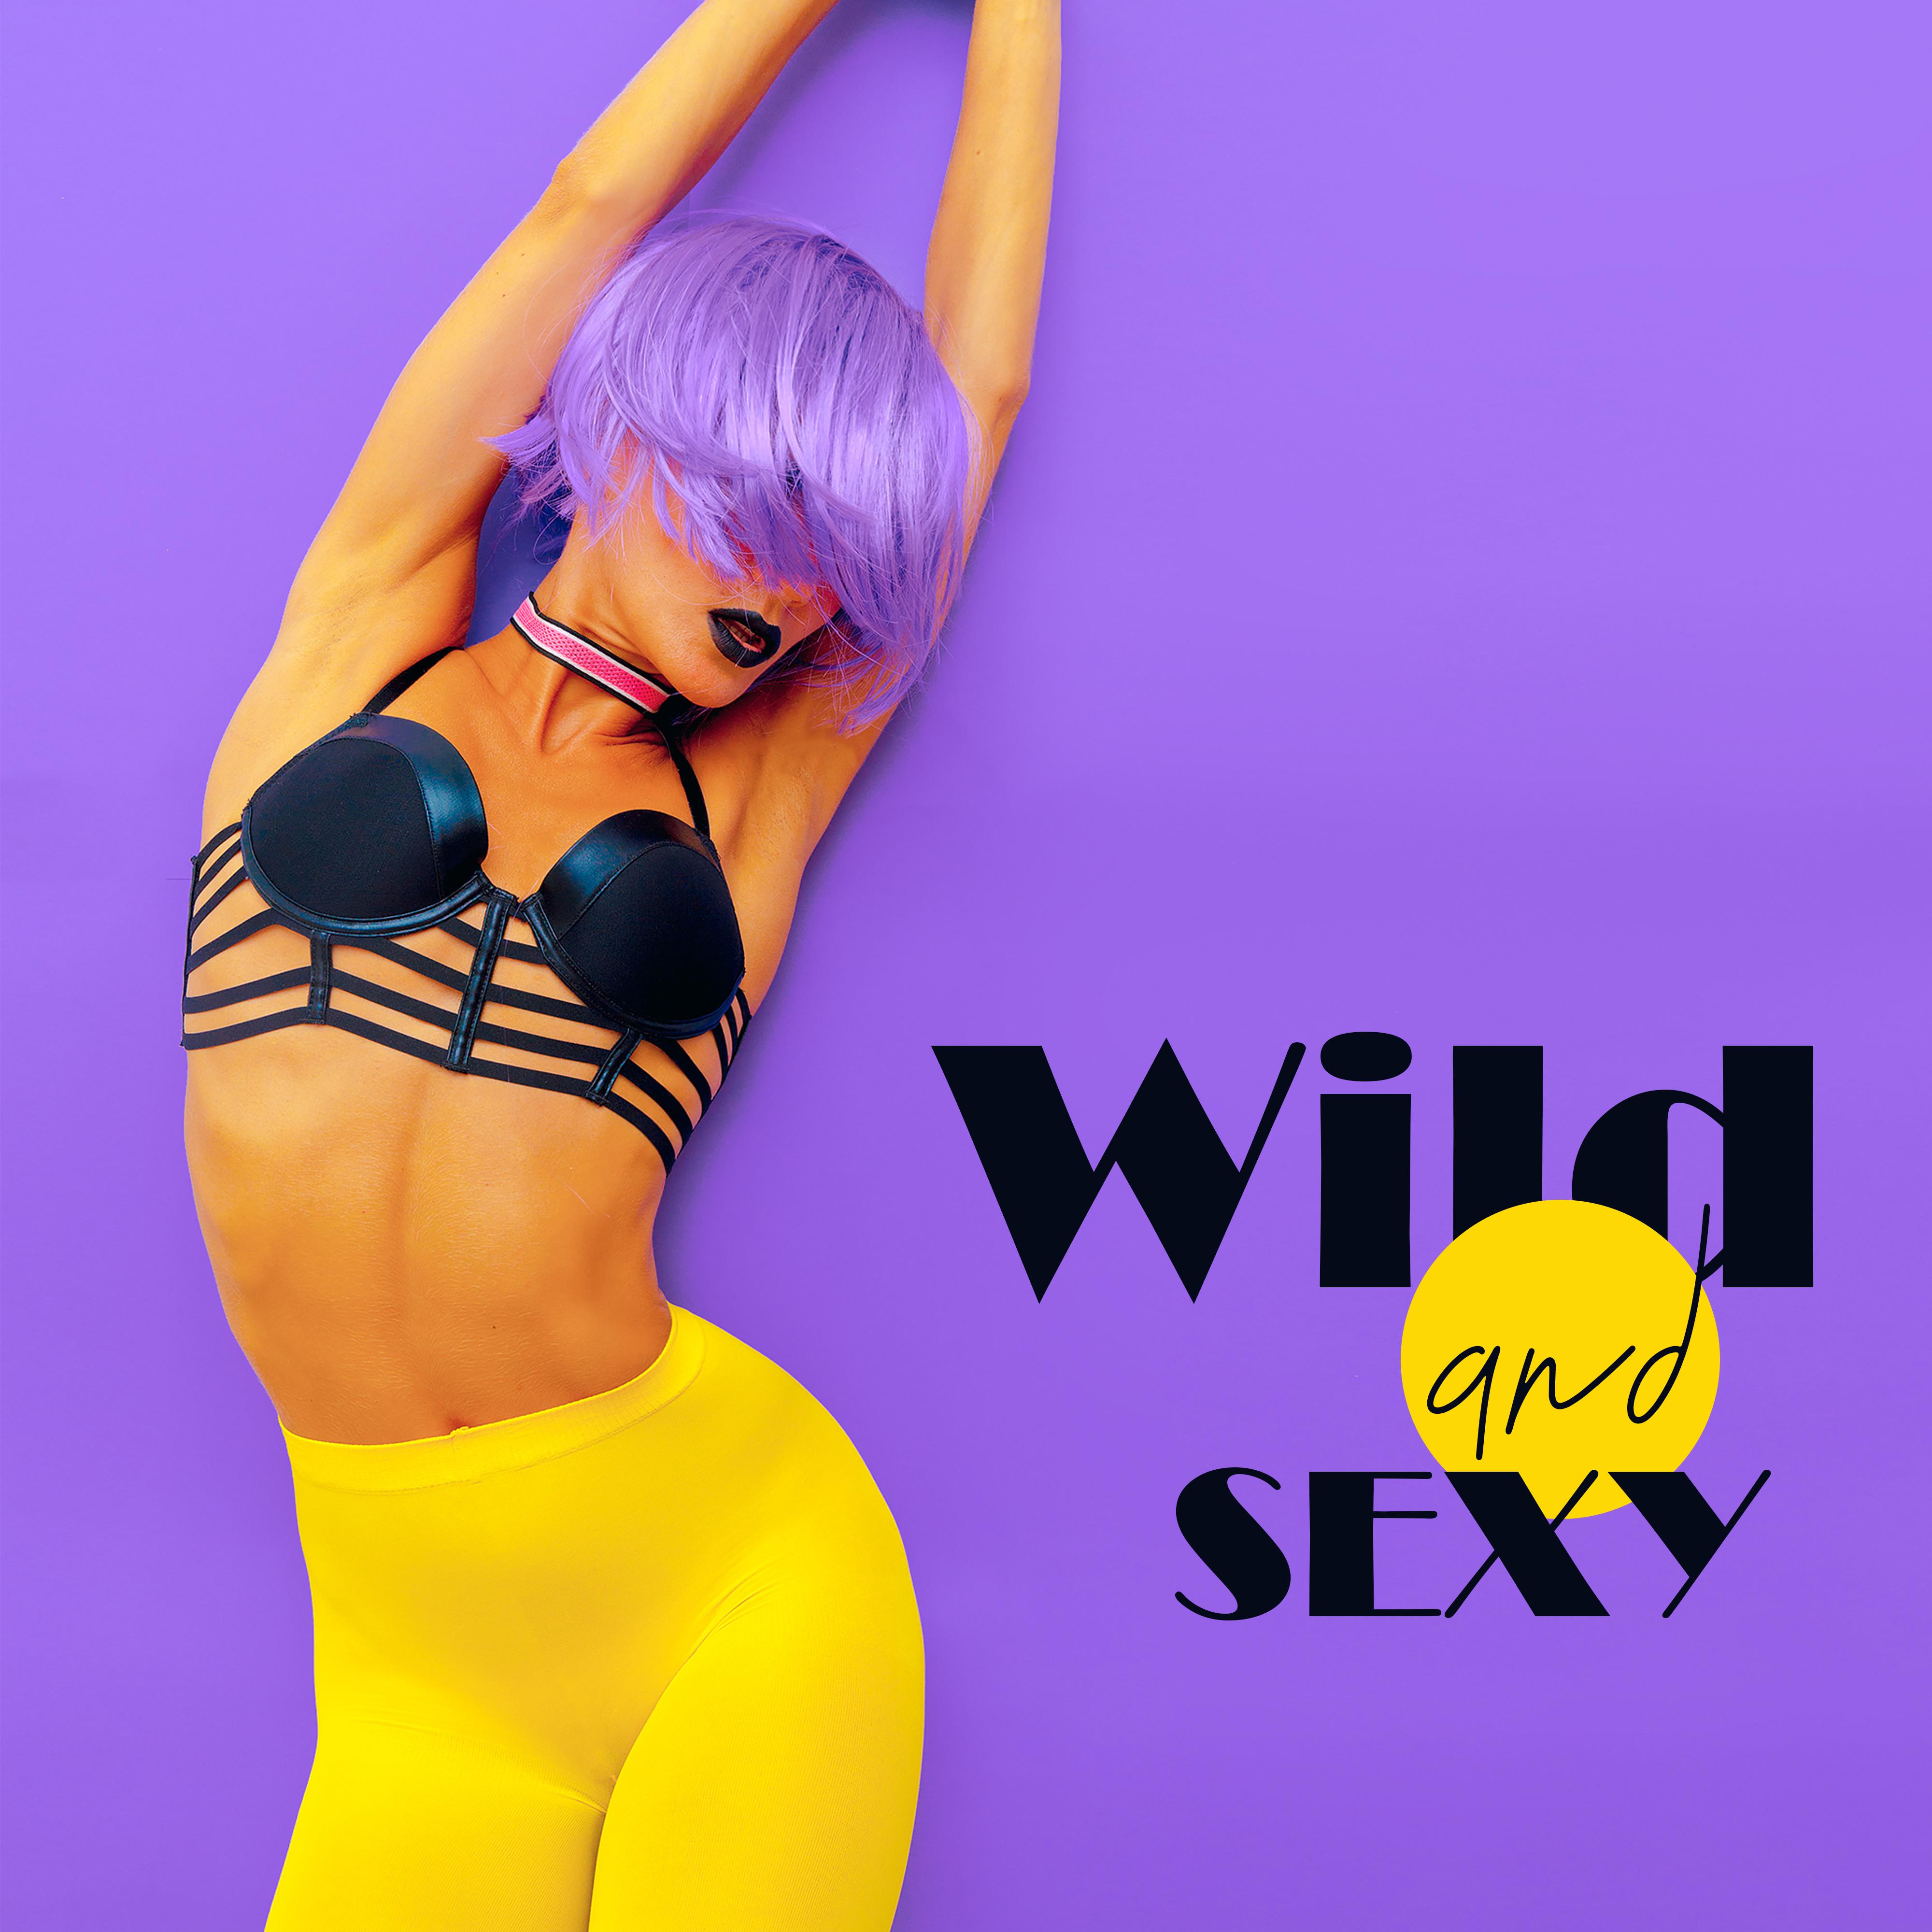 Wild and ****: Love Chillout Beats for Couples in Love for Sensual Moments of ****** Ecstasy